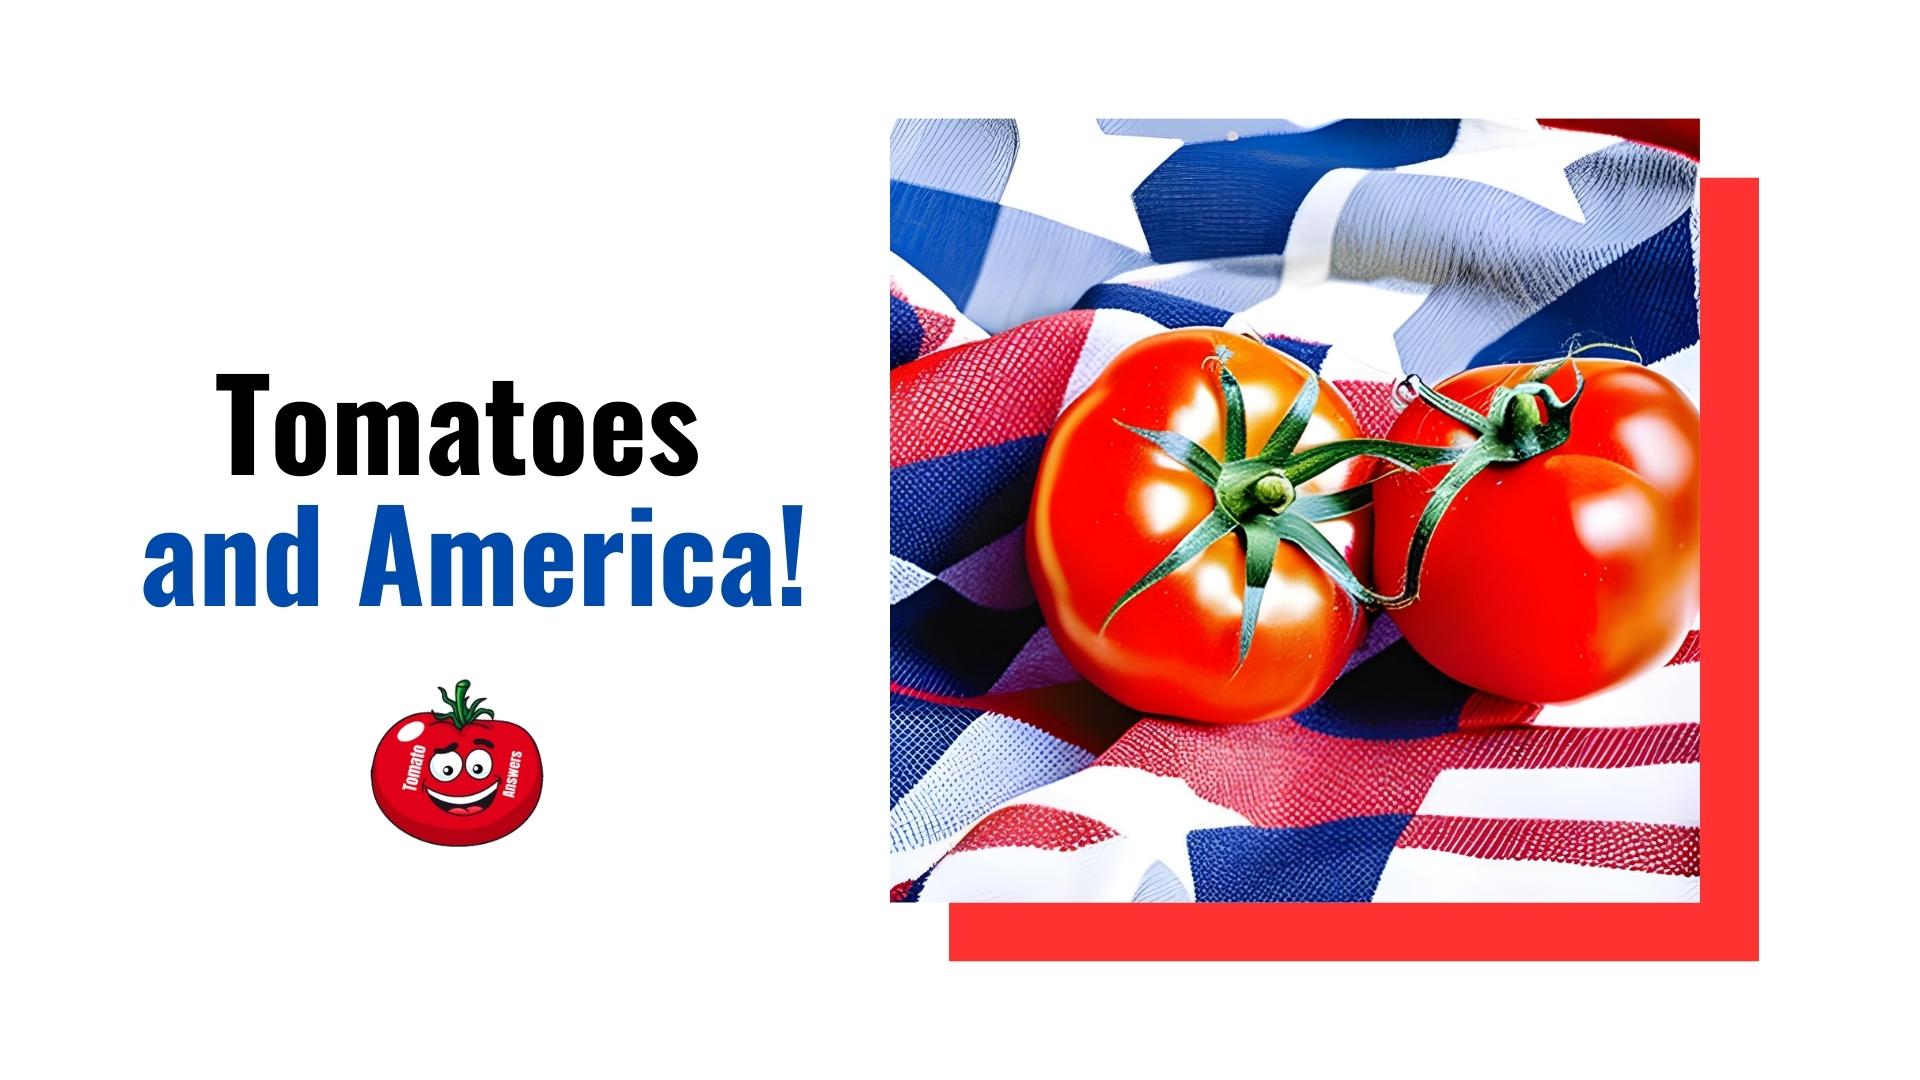 Tomatoes and America